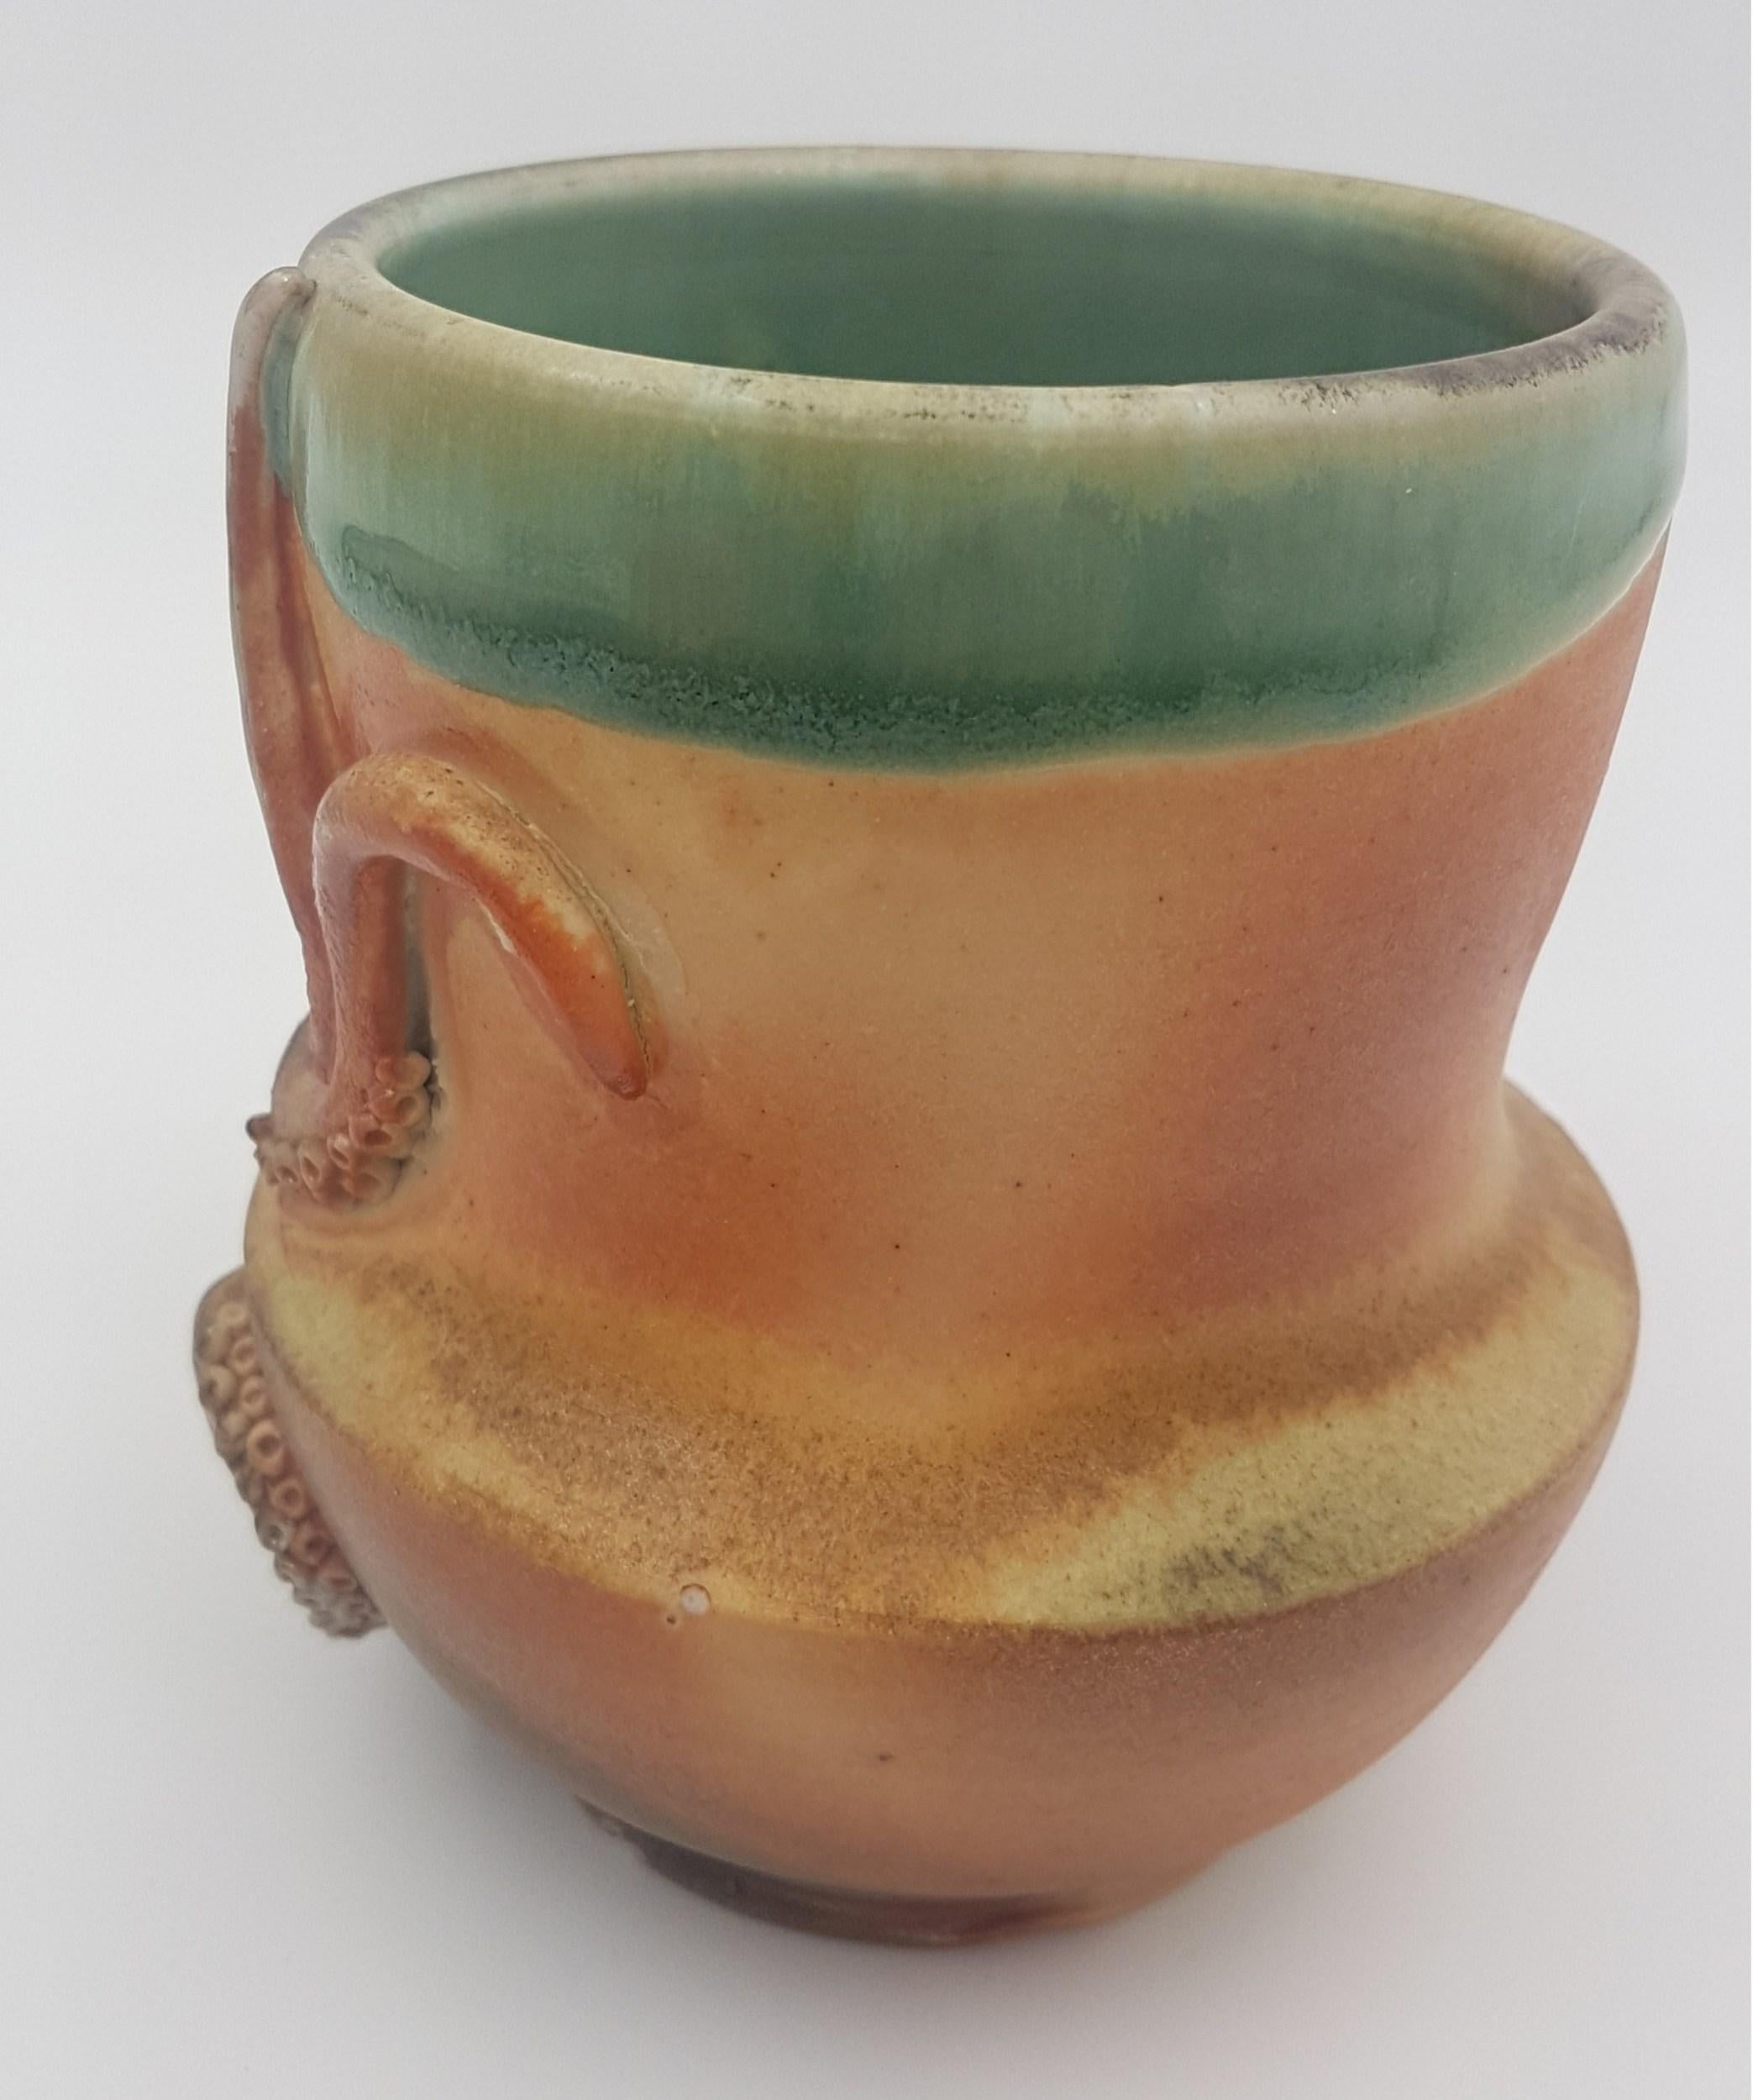 Title : Octomug
Materials : Wood Fired Porcelain
Date : 2016
Dimensions : 4.5″x3.25″x5.25″
Description : Wood fired Octomug
Signed
Galllery COA provided

------------------------

Amy Young Artist Statement:

